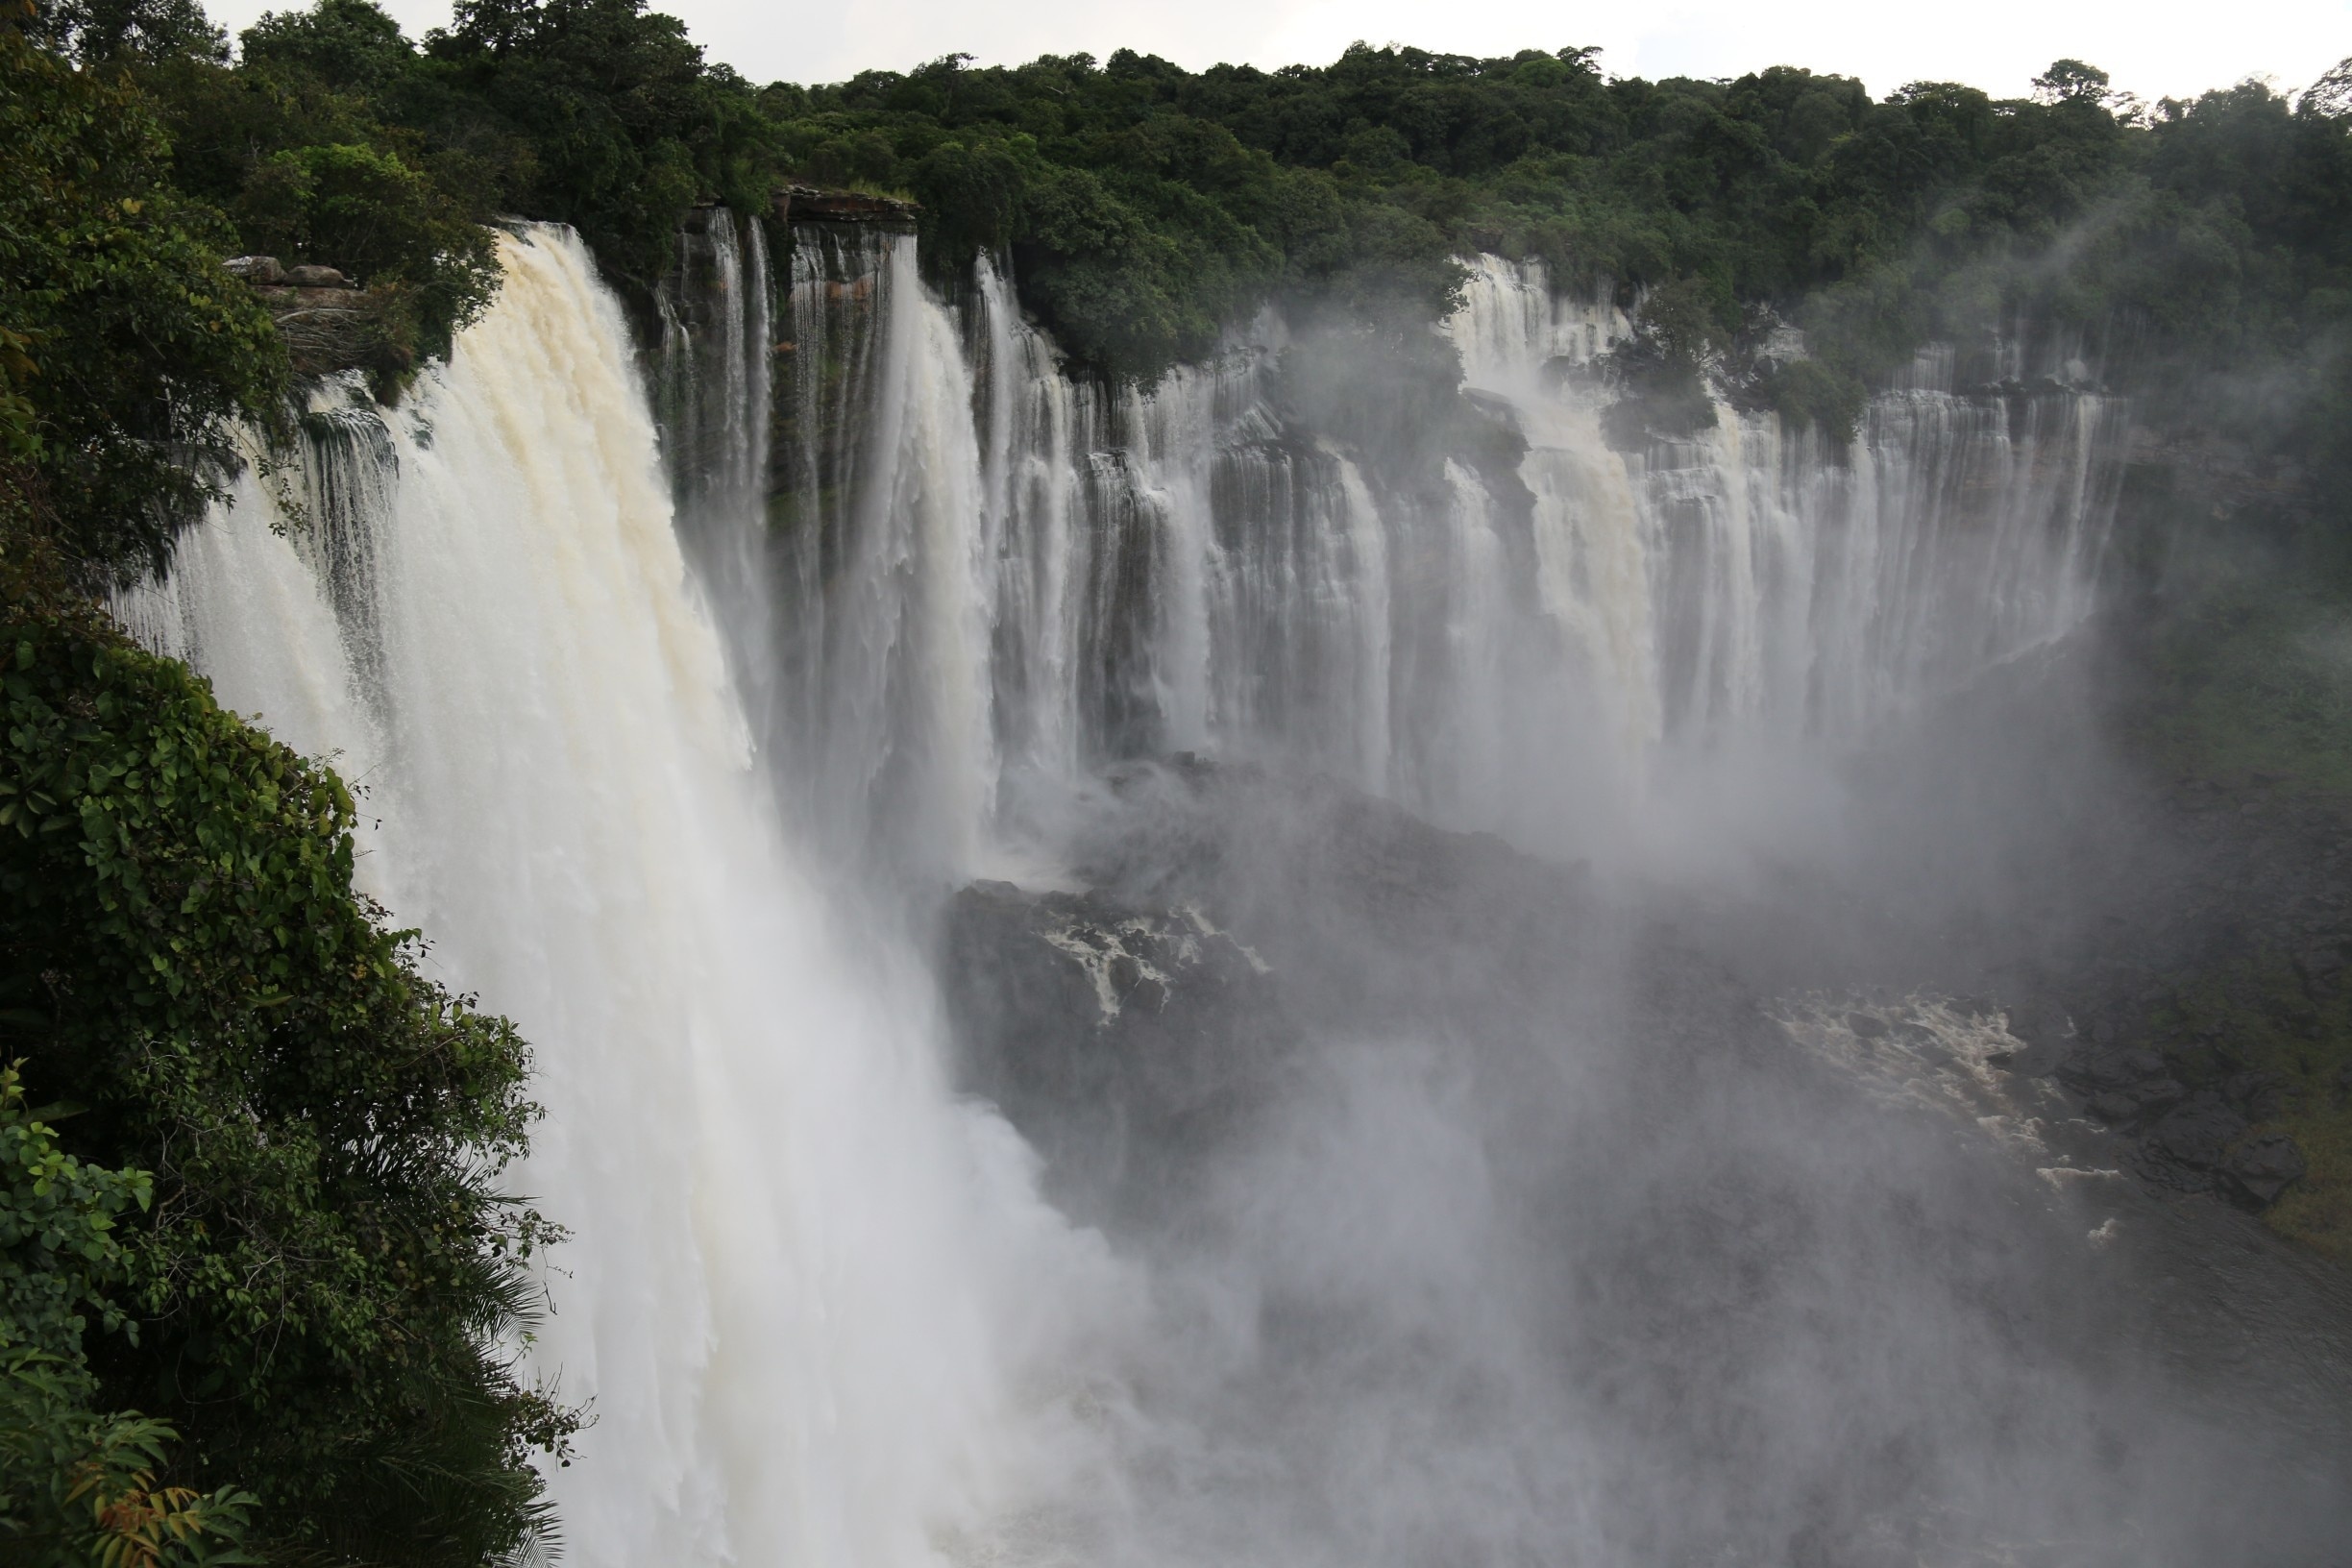 Kalandula Falls (formerly Duque de Bragança Falls during Portuguese rule) are waterfalls in the Malanje Province, Angola, around 350 km away from Luanda. The falls are from Lucala River.